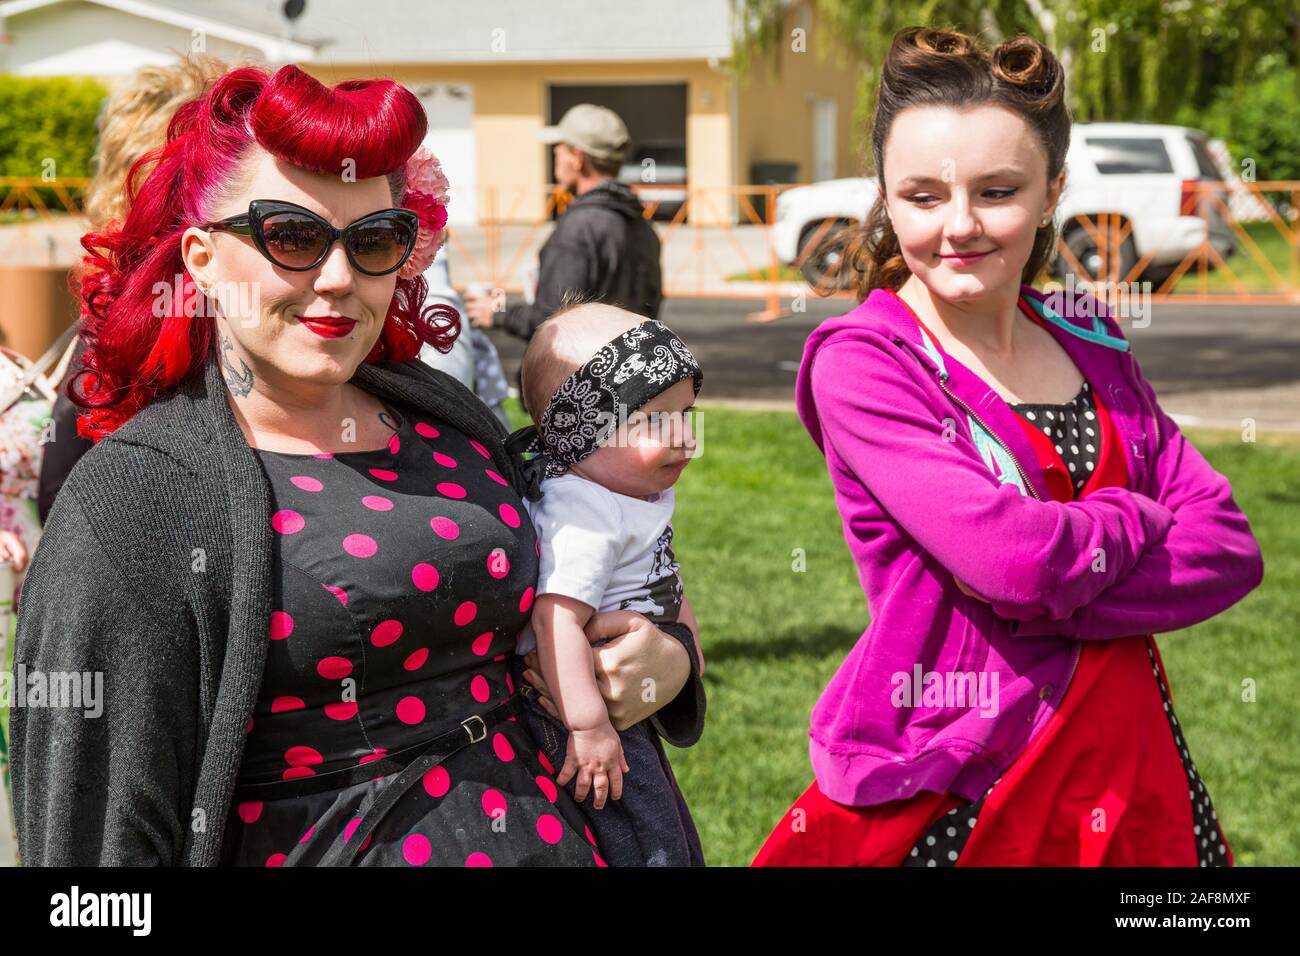 A mother and daughter dressed in 1950's period outfits and sporting period coiffures at the Moab April Action Car Show in Moab, Utah.  The elder woman Stock Photo